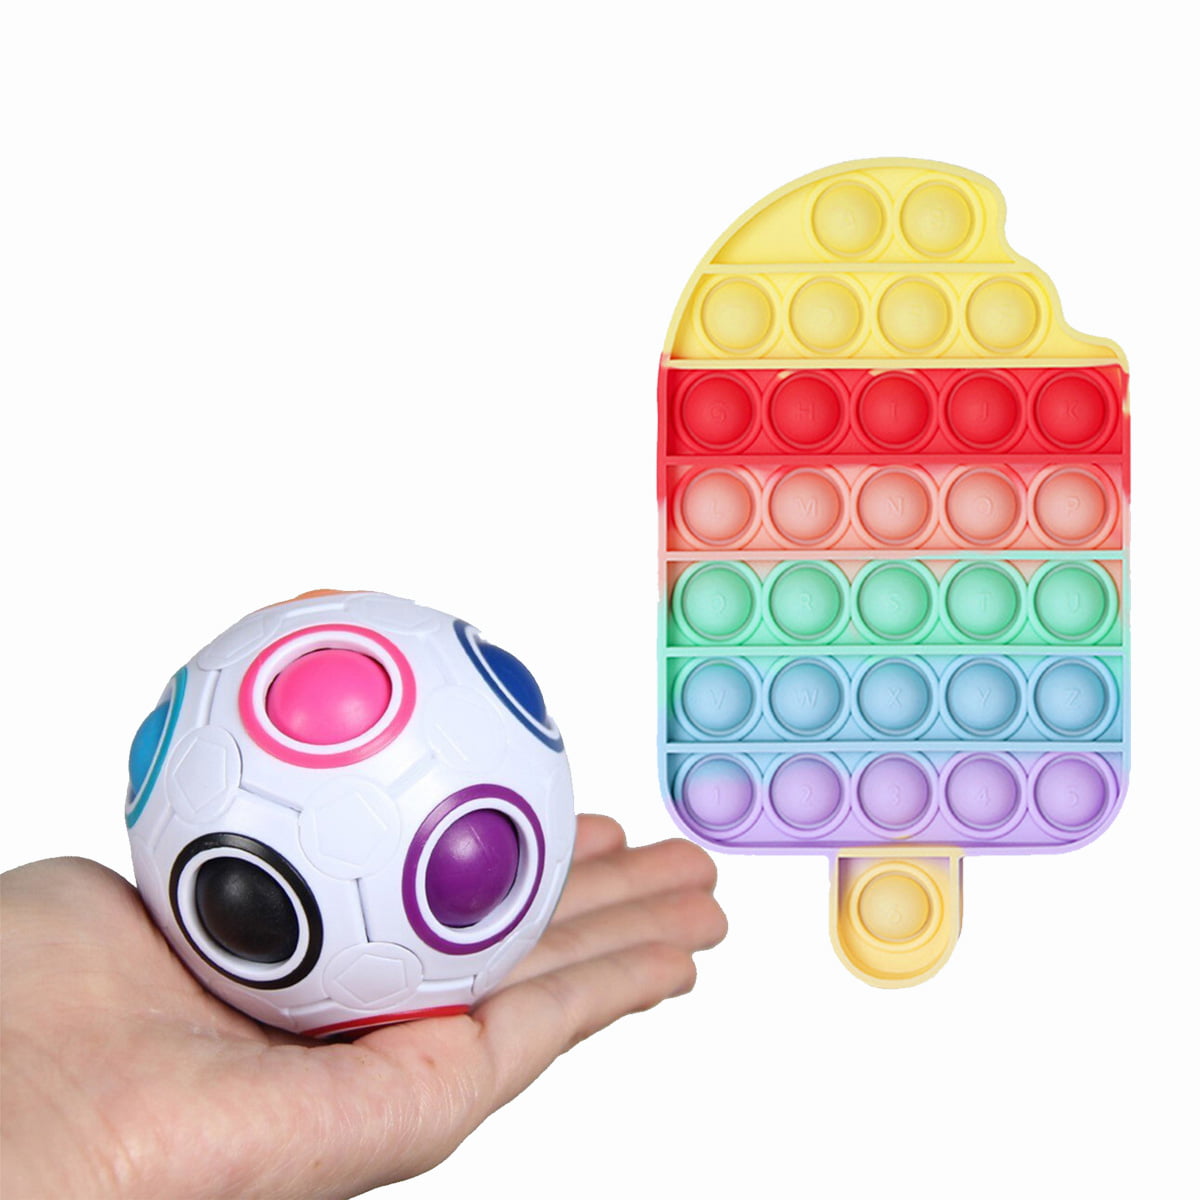 2PC Portable Pop it Decompression Fidget Toys Silicone Stress Pressure Relief Hand Toys Simple Squeeze Sensory Toys Autism Special Needs for Kids Adults 